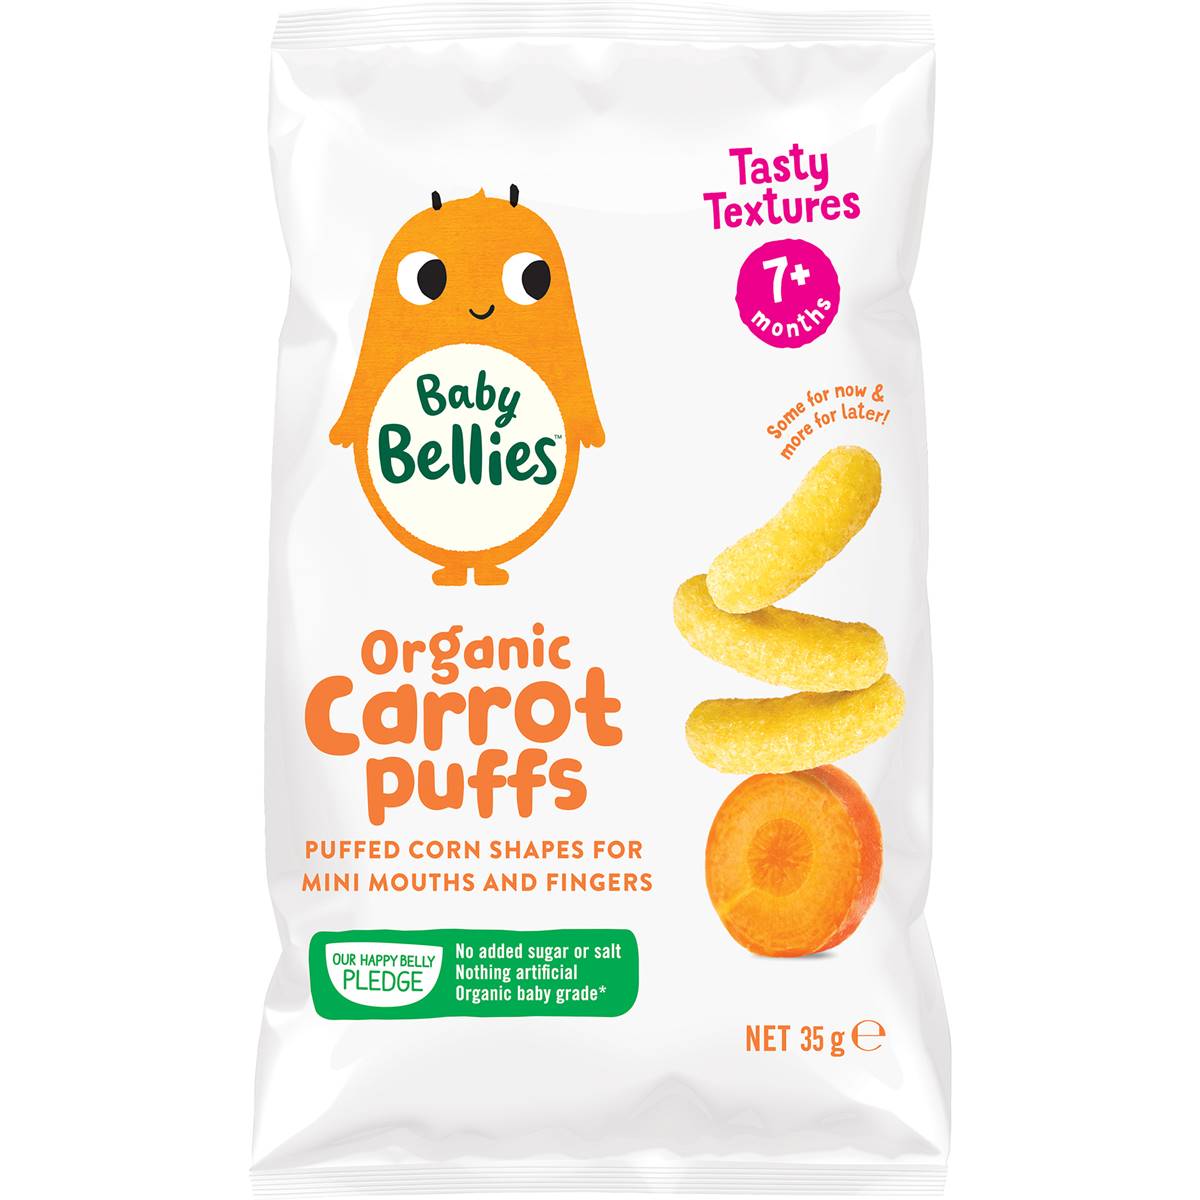 Calories in Baby Bellies Organic Carrot Puffs